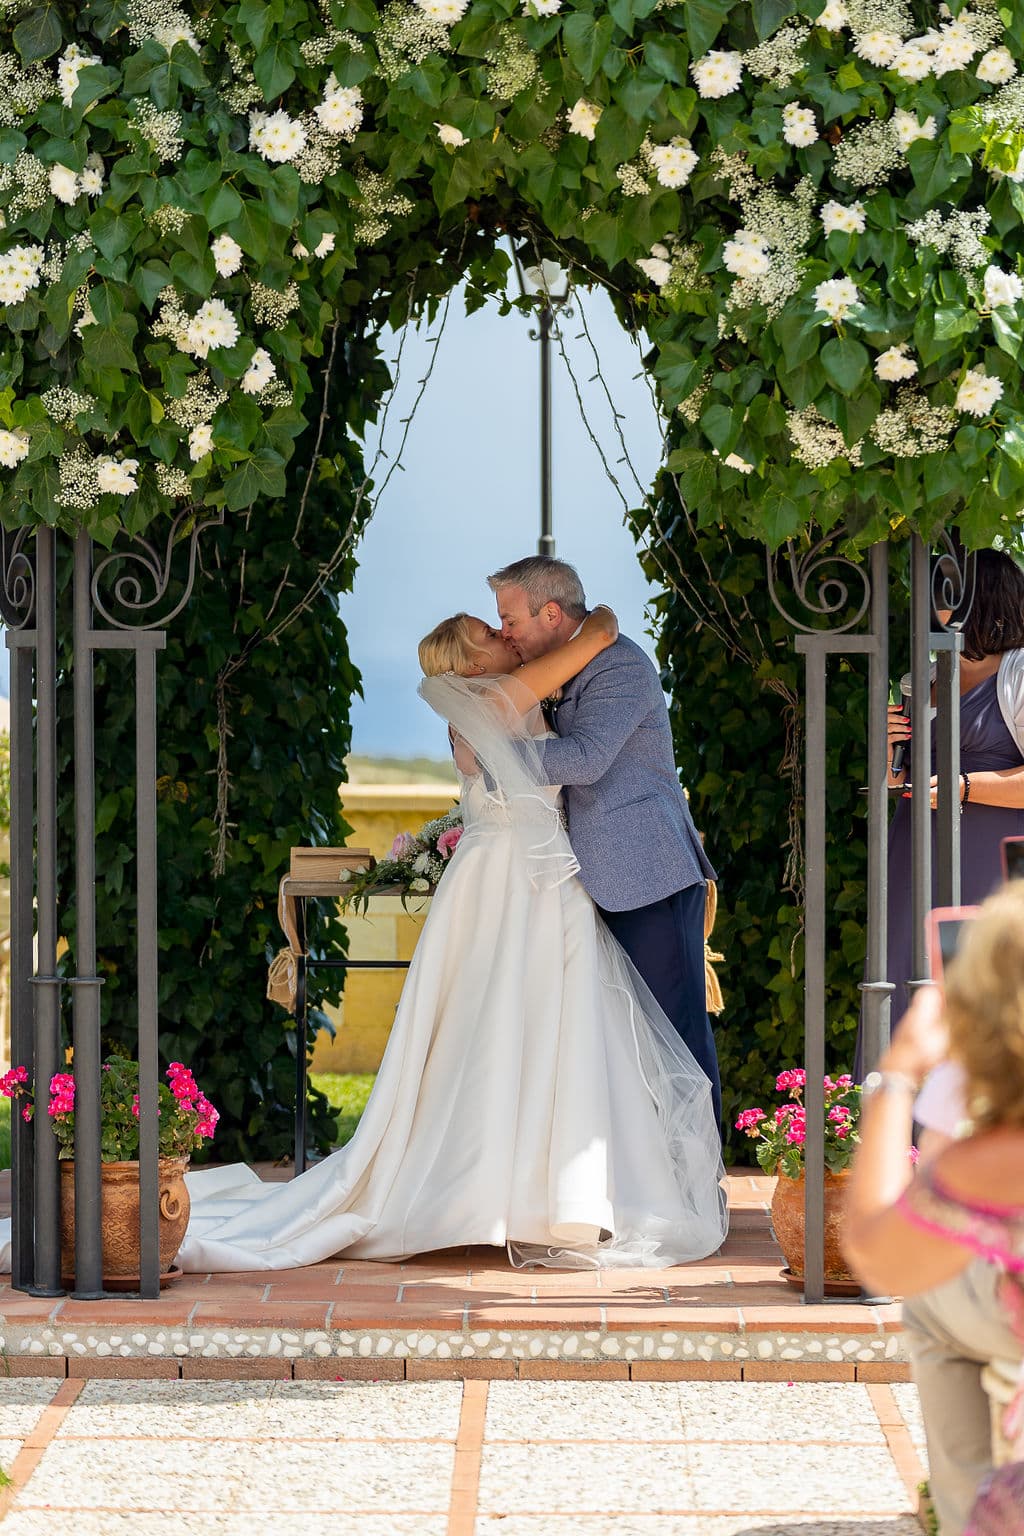 Newlyweds share a kiss gazebo at the private and exclusive Cortijo Maria Luisa in Nerja, Spain. Photo by Dougie Farrelly, renowned Irish Professional Wedding Photographer. Collaboration with Silverscreen Film & Photography